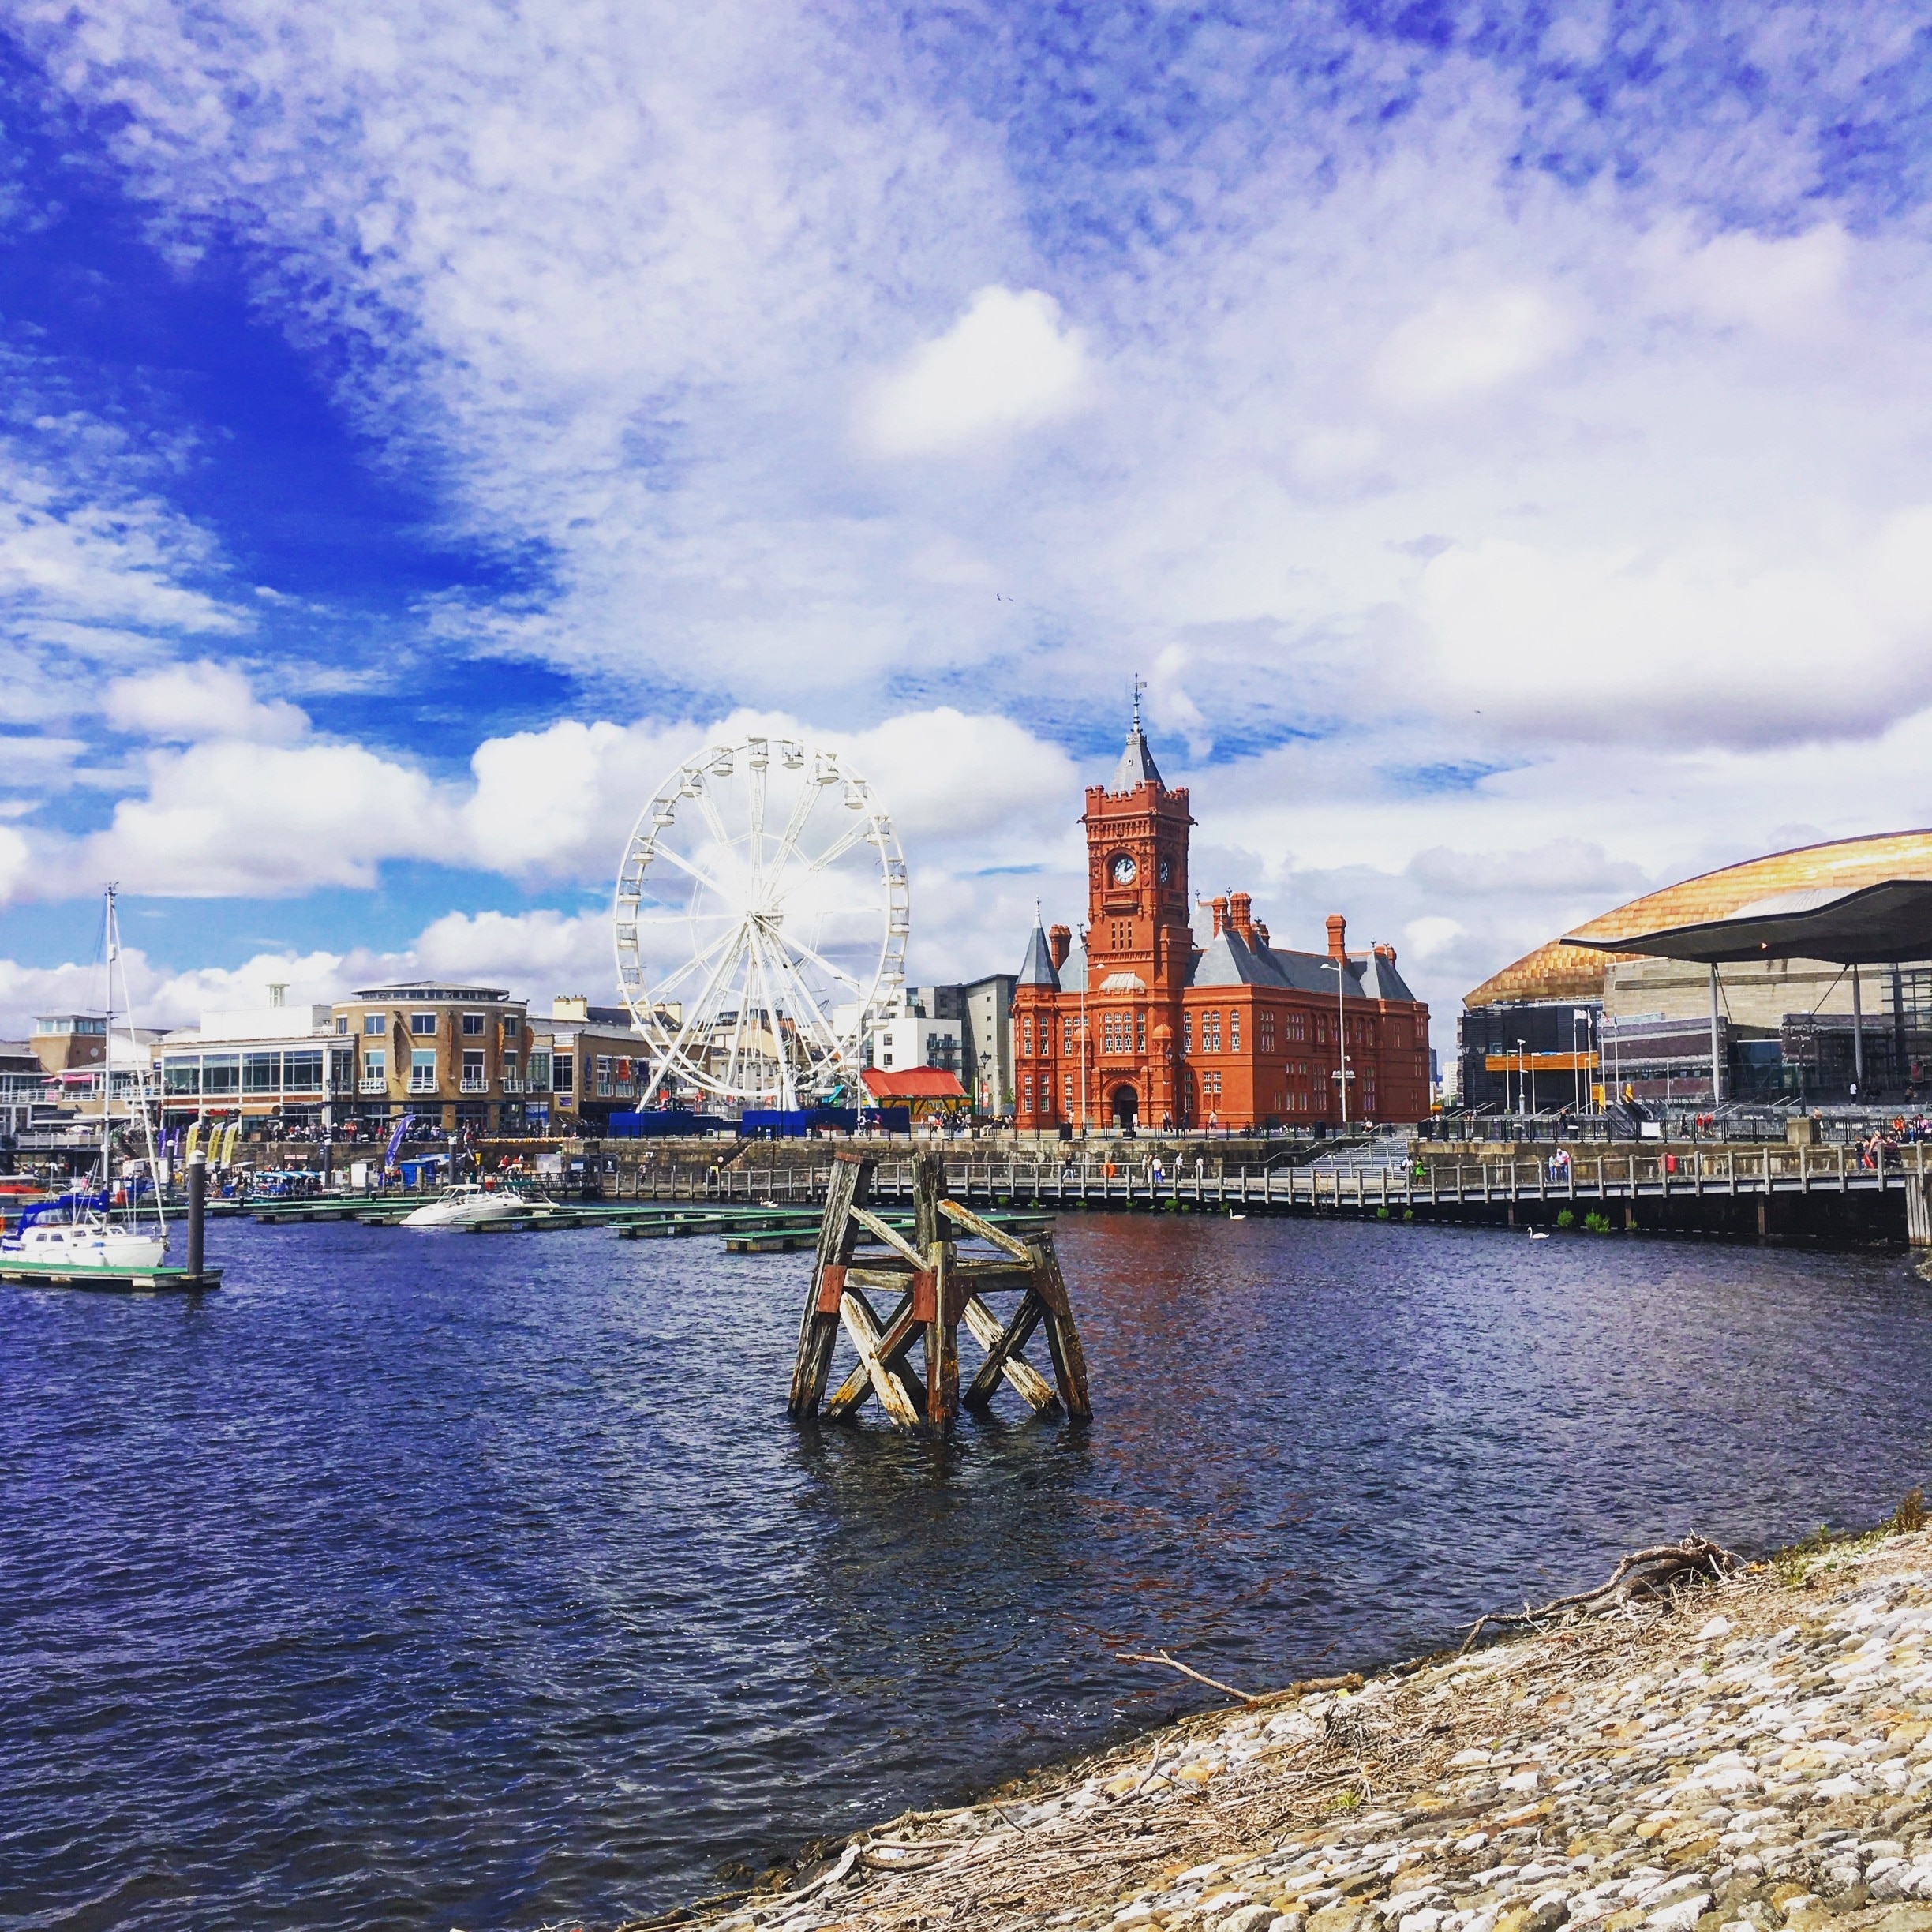 Why you should visit Cardiff Bay Beach and The Doctor Who